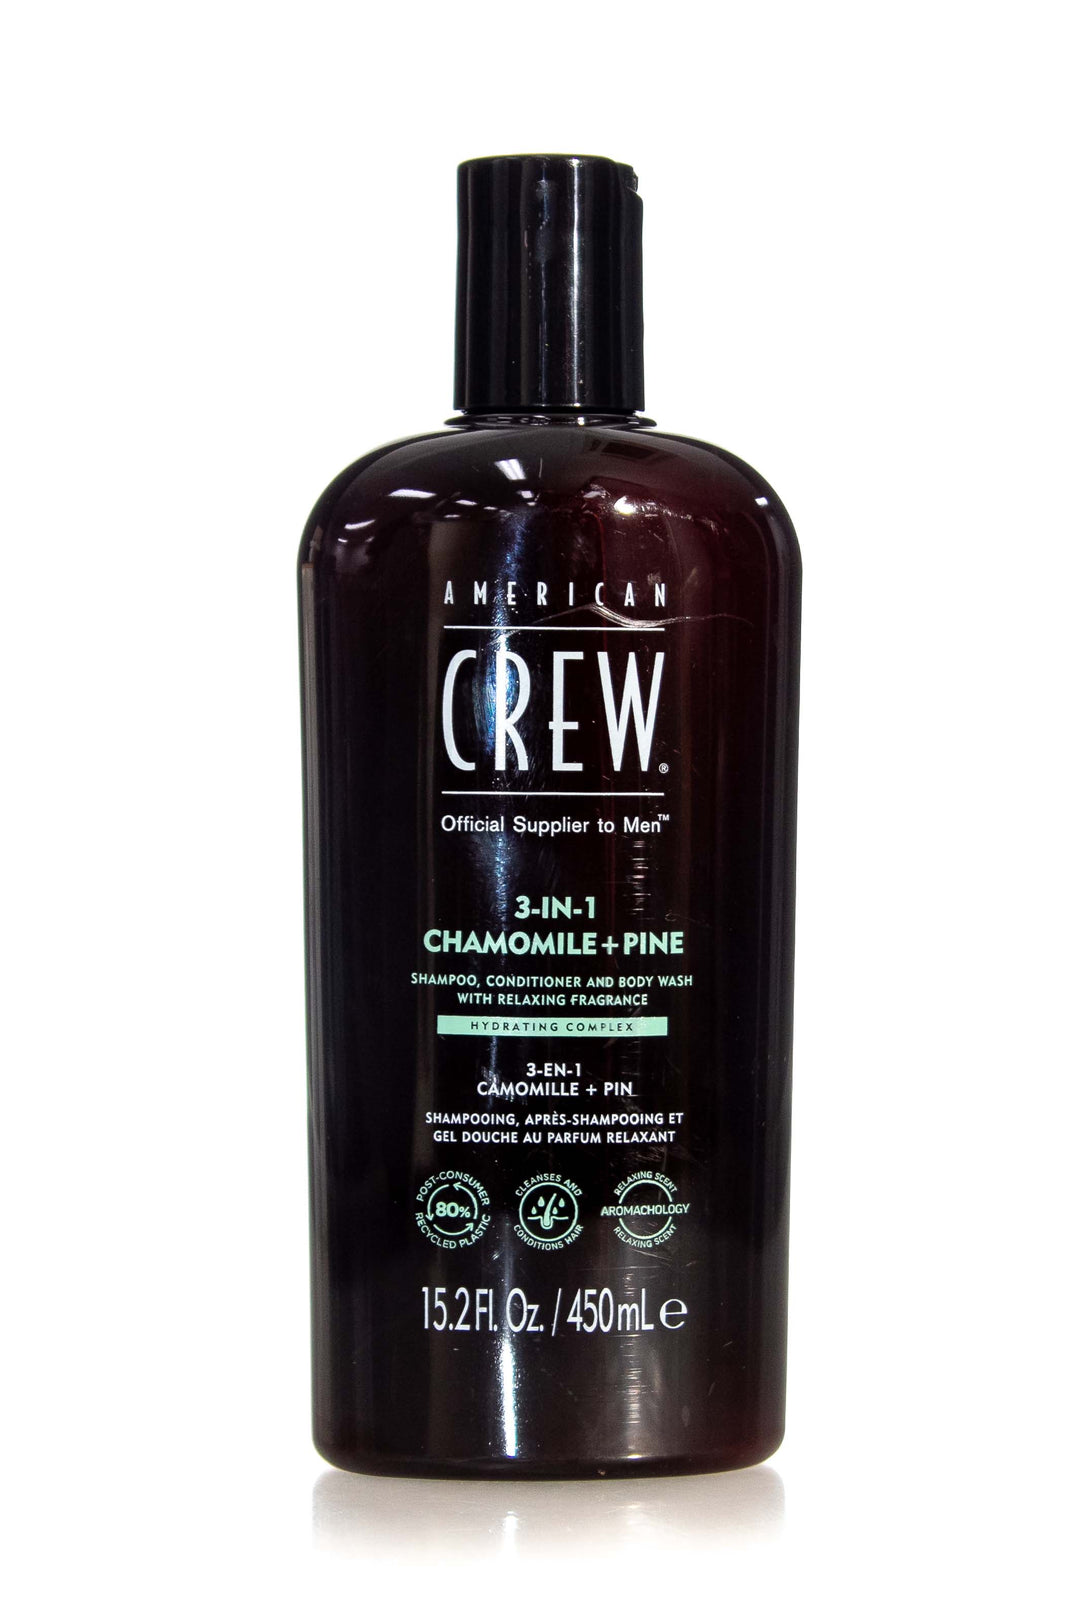 AMERICAN CREW 3-IN-1 RELAXING SHAMPOO/CONDITIONER/BODY WASH 450ML